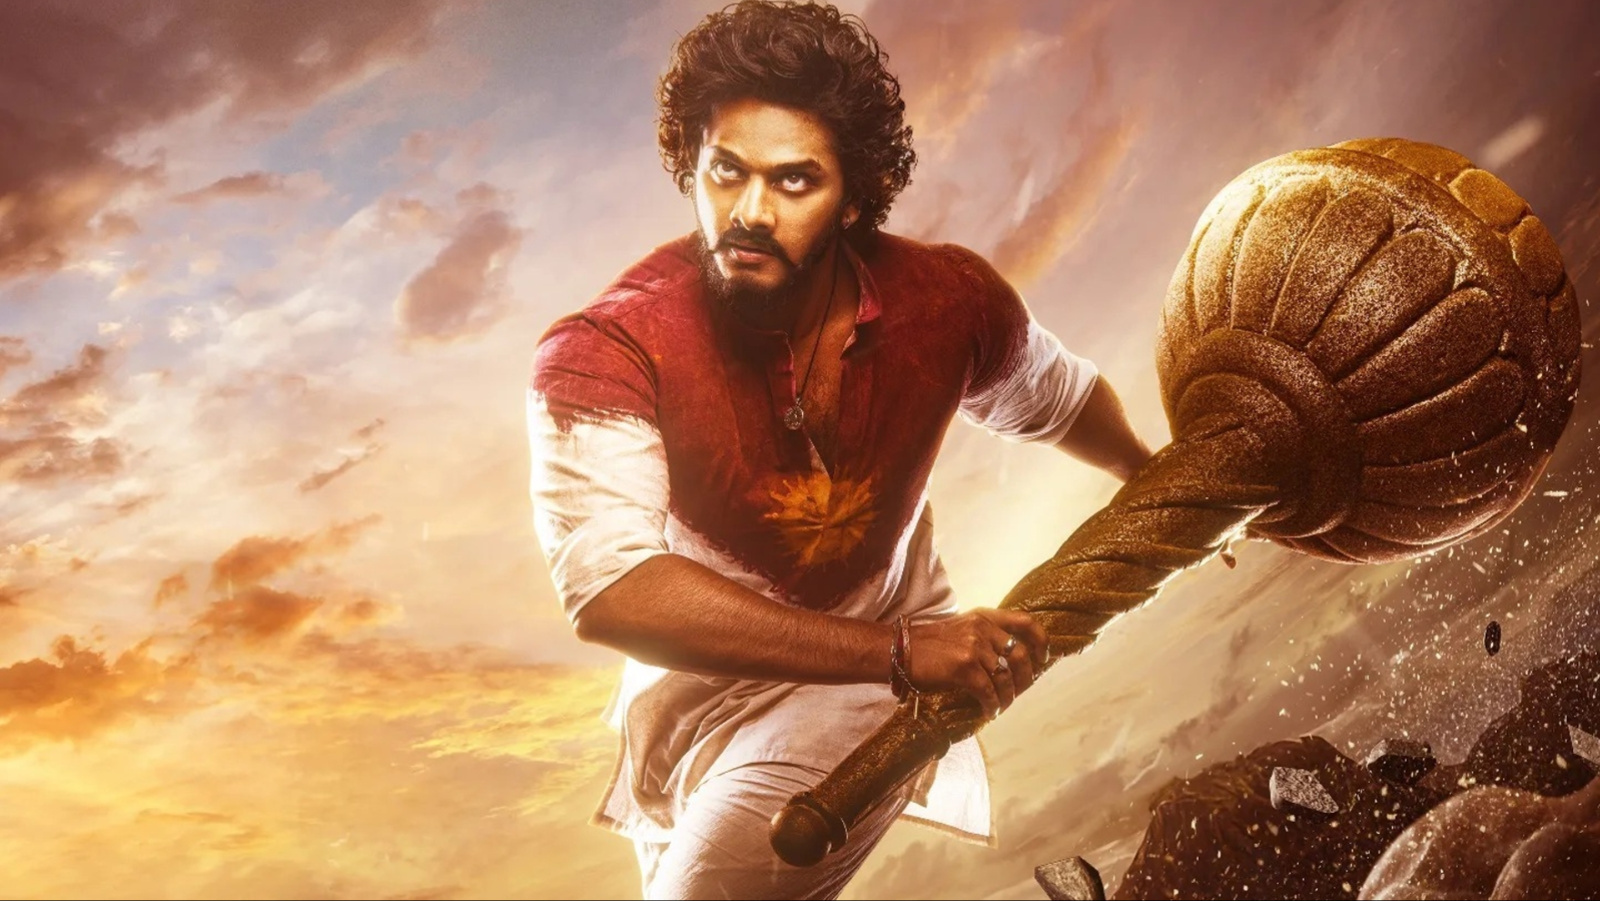 android, hanuman box office collection day 7 : teja sajja’s superhero film is unstoppable as it nears rs 150 crore worldwide, outperforms kantara’s first-week total